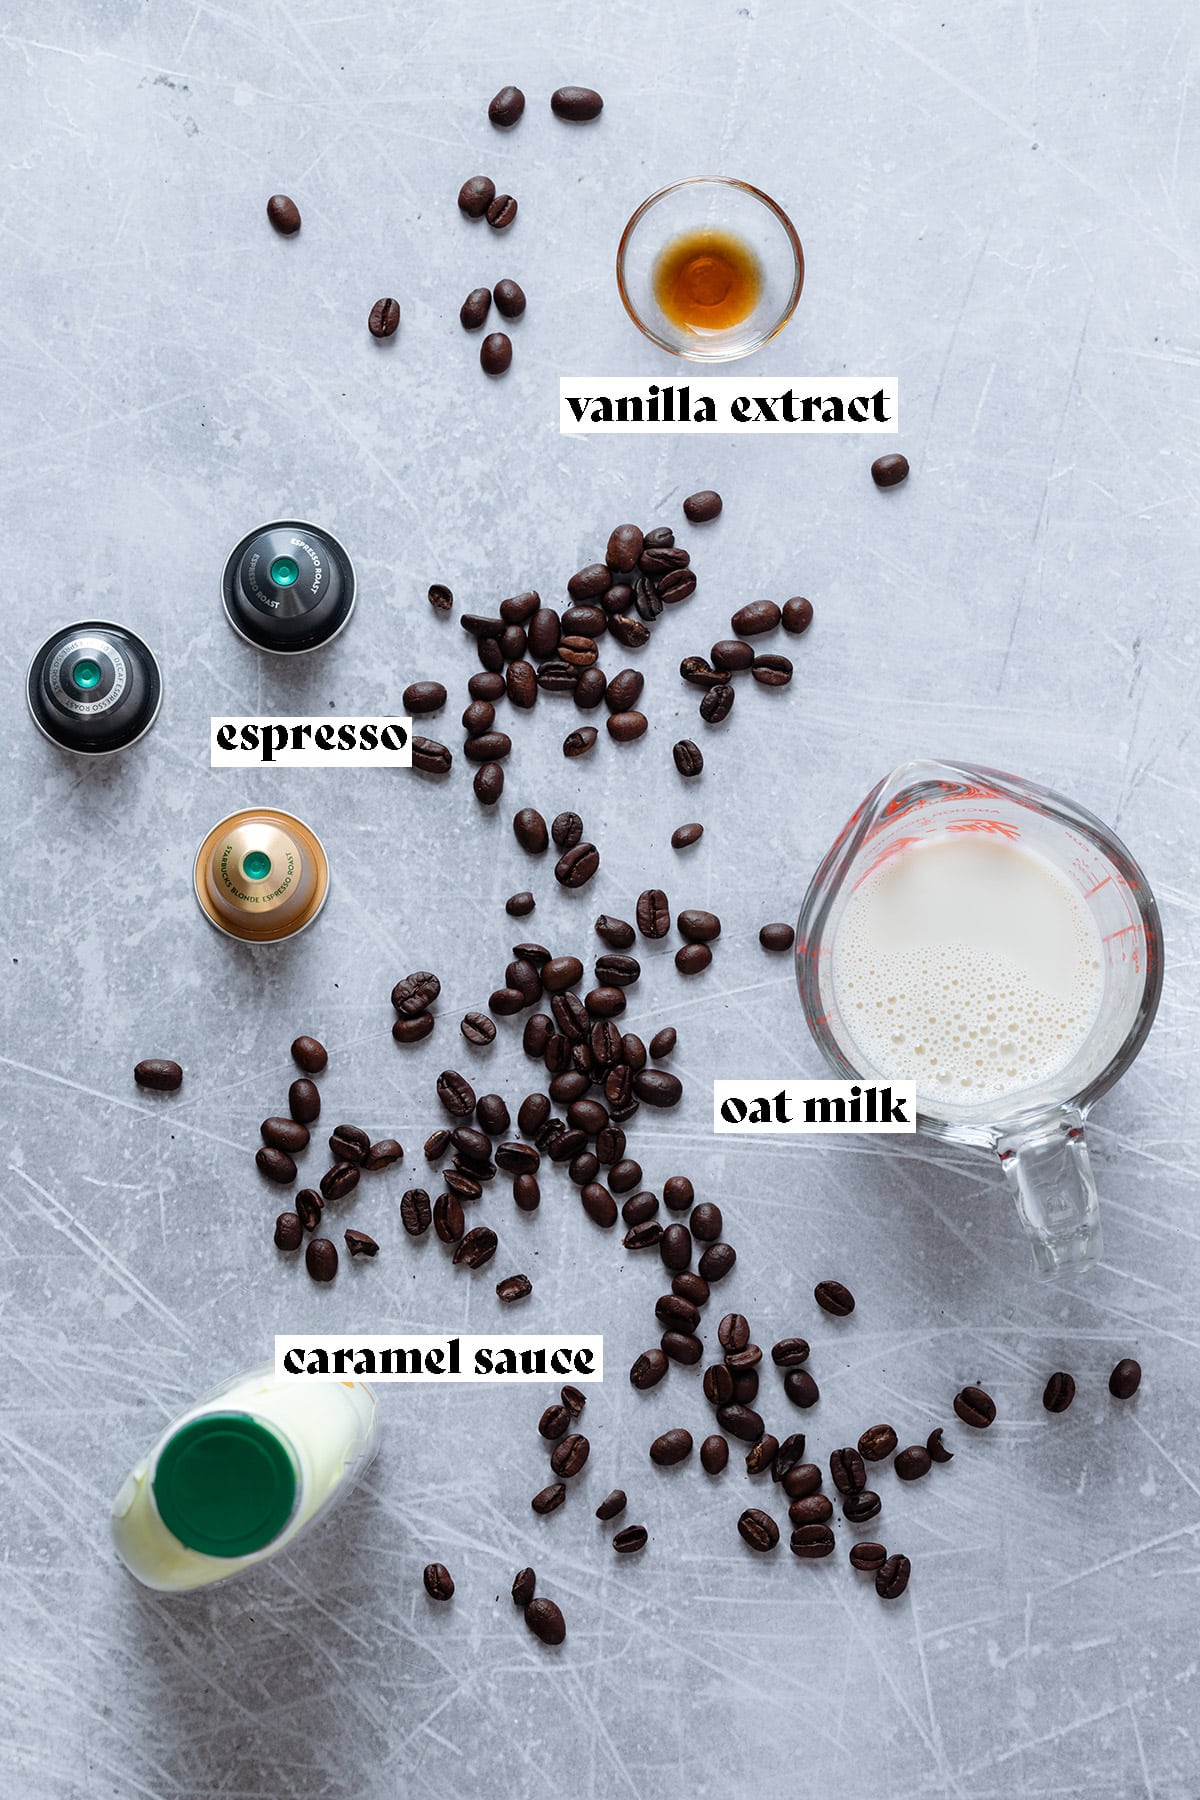 Ingredients for an iced caramel macchiato like espresso, caramel, and milk all laid out.